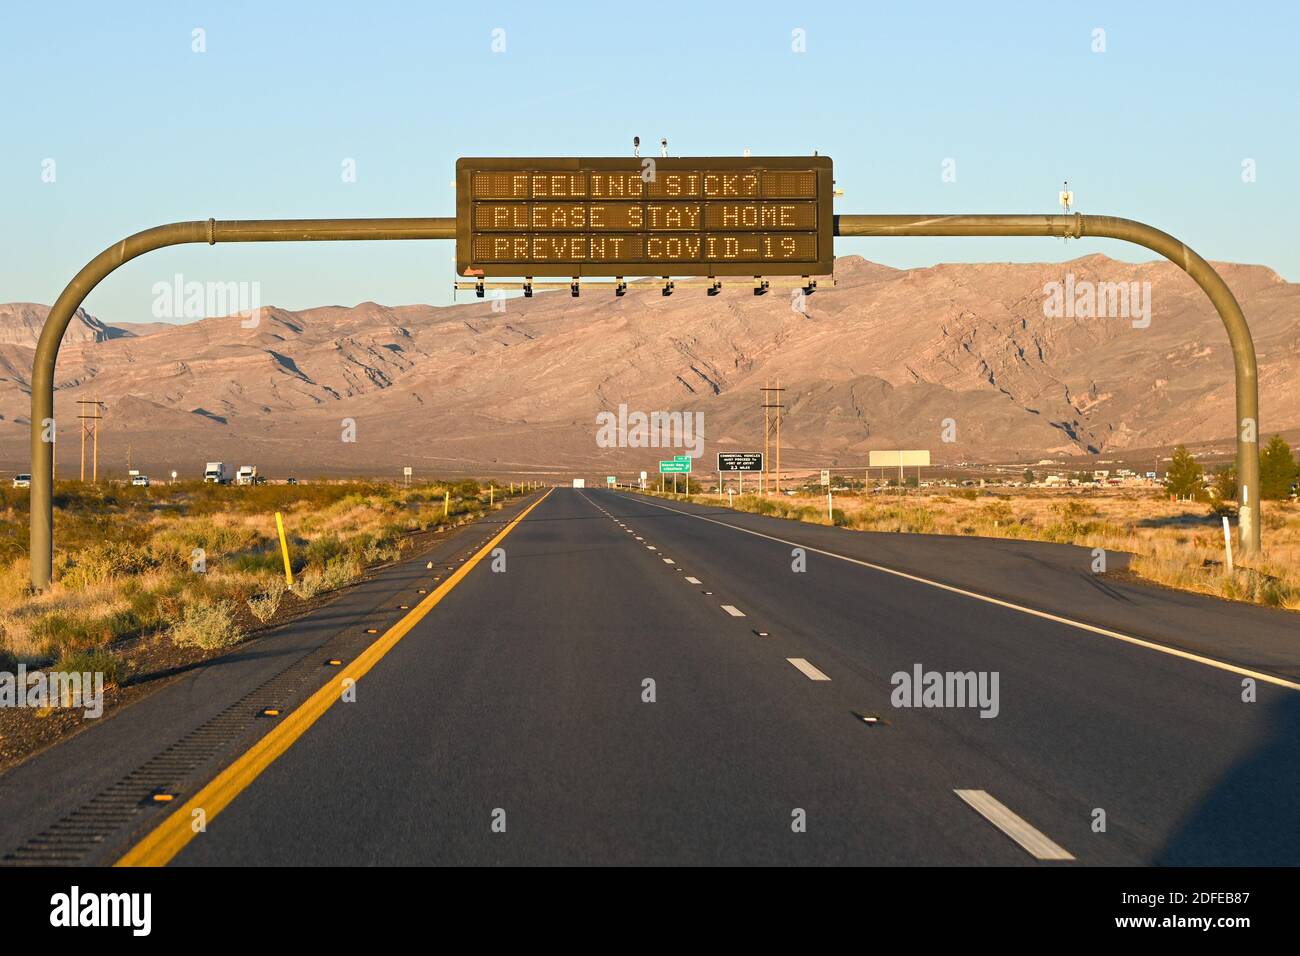 Signage over Interstate 15 North urges “Feeling Sick? Please Stay Home Prevent Covid-19”, Tuesday, Nov. 10, 2020, Littlefield, Ariz. (Dylan Stewart/Im Stock Photo